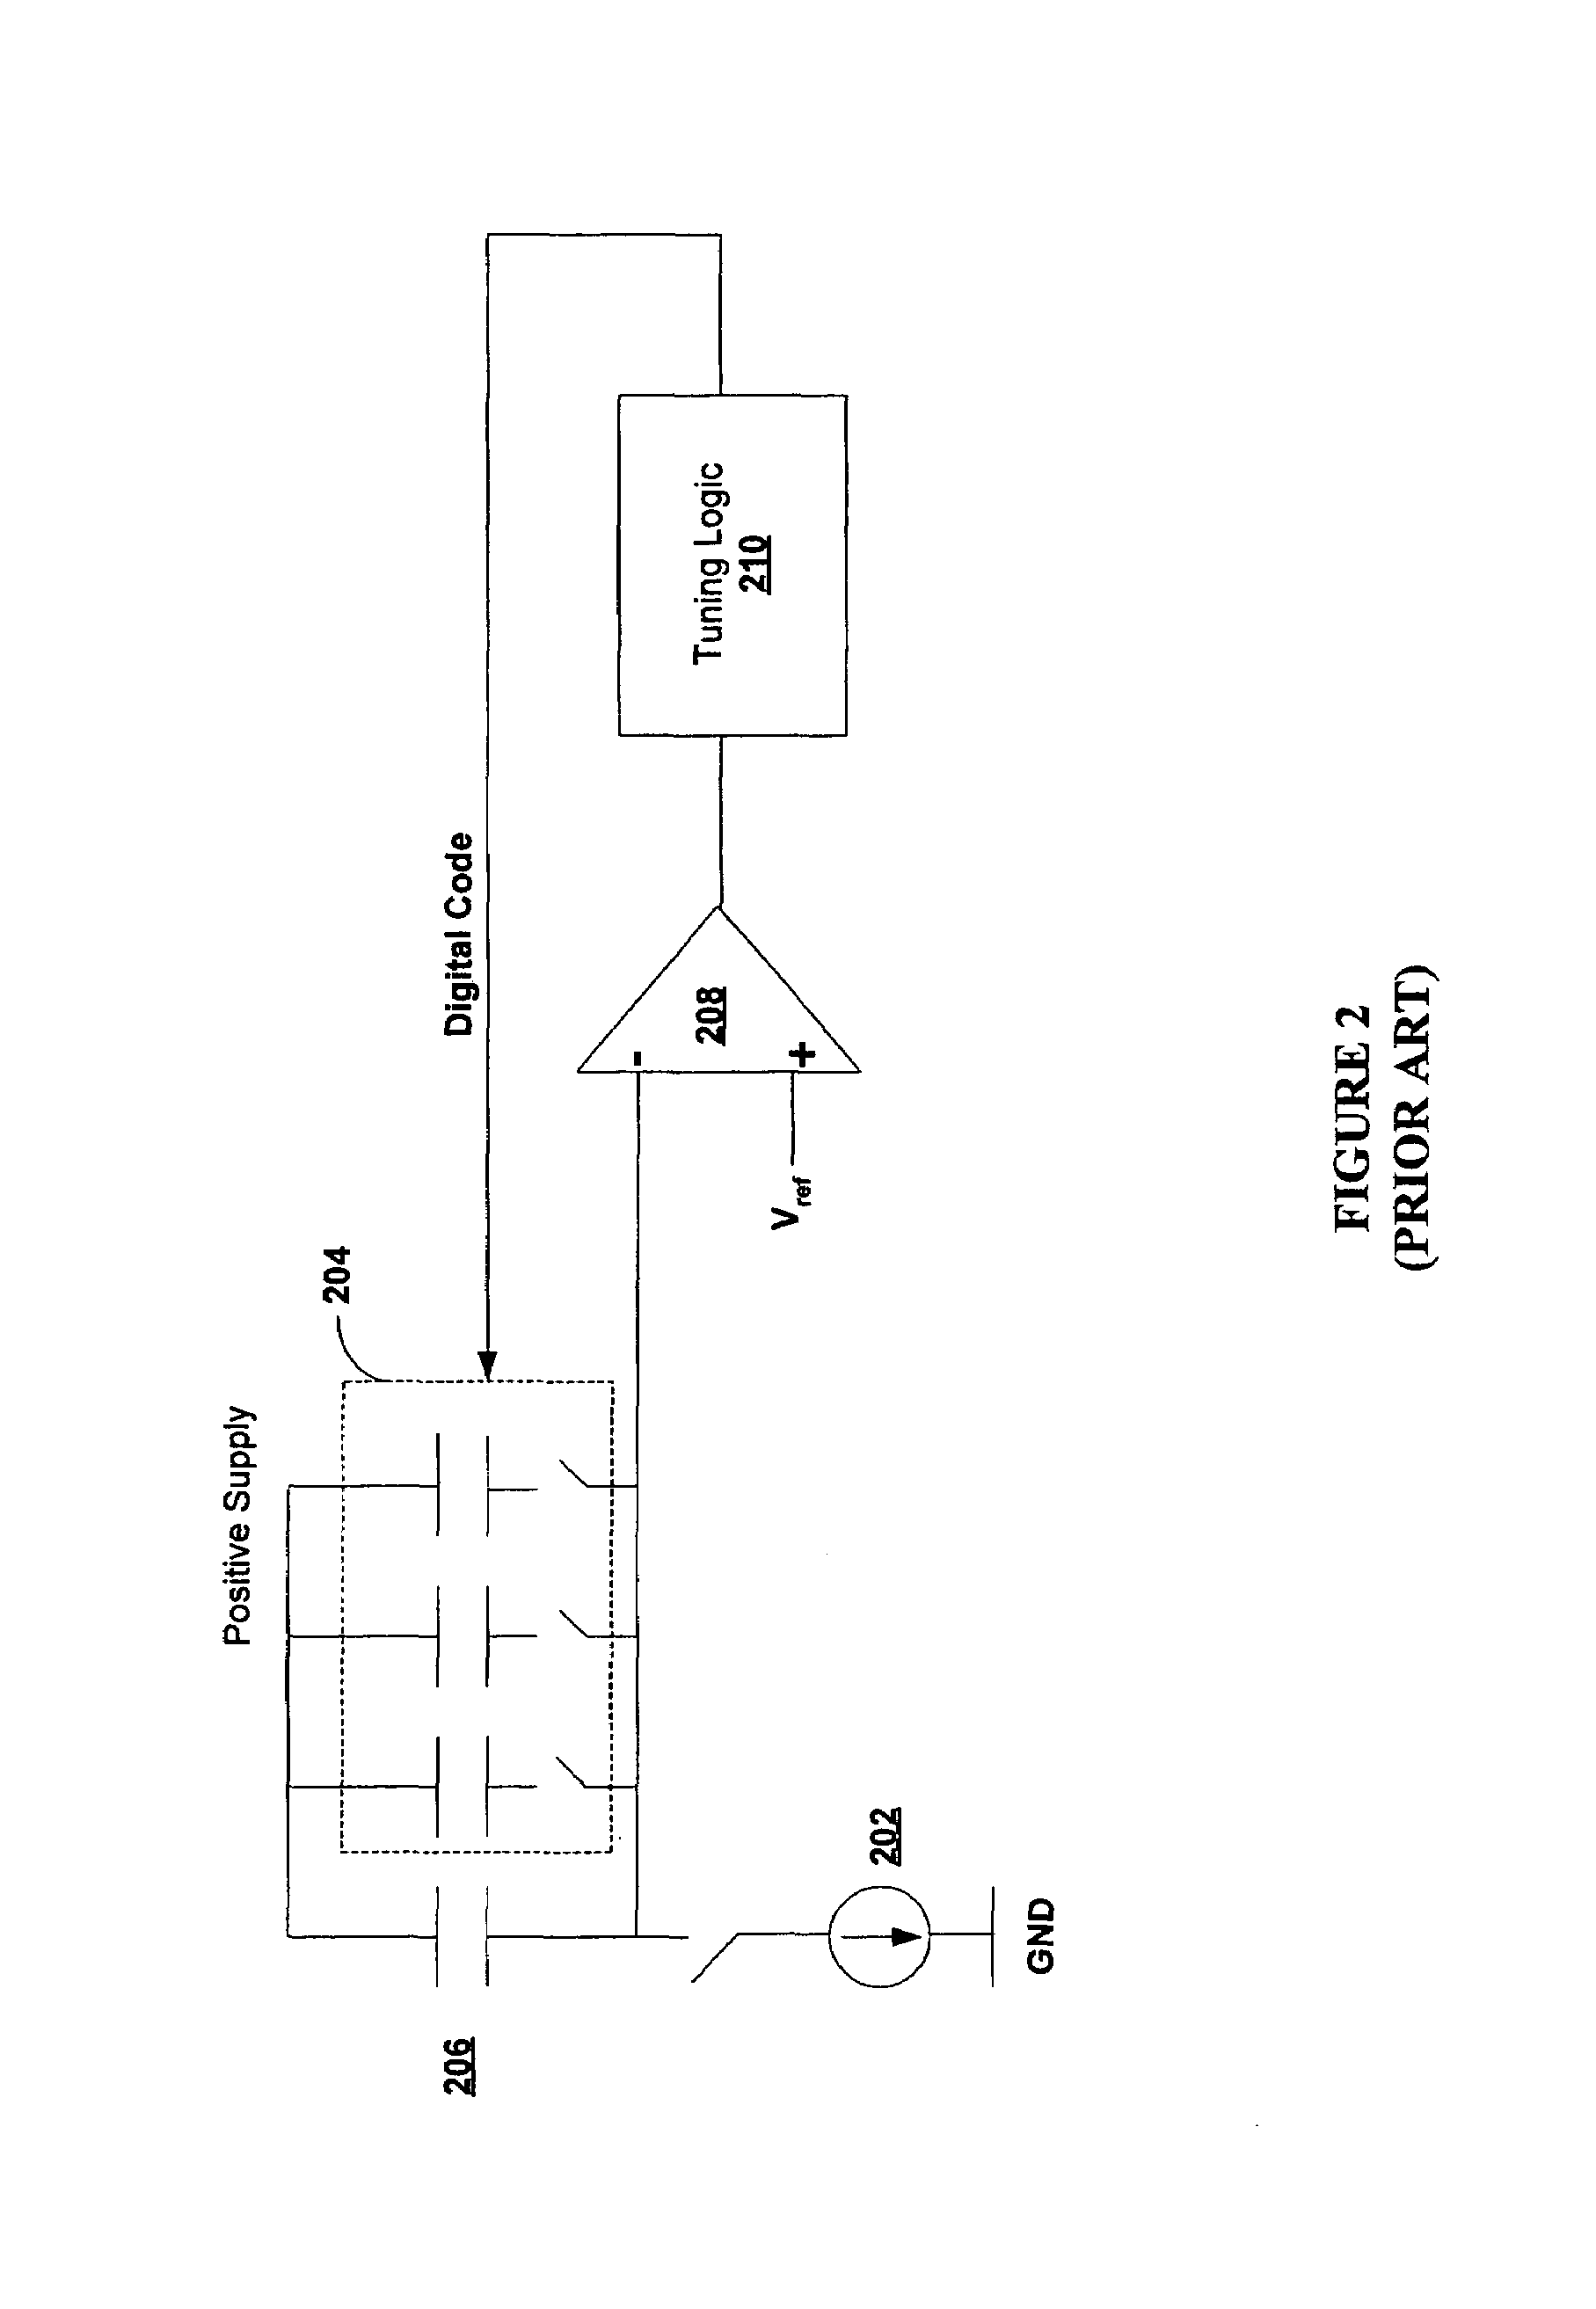 Hybrid tuning circuit for continuous-time sigma-delta analog-to-digital converter